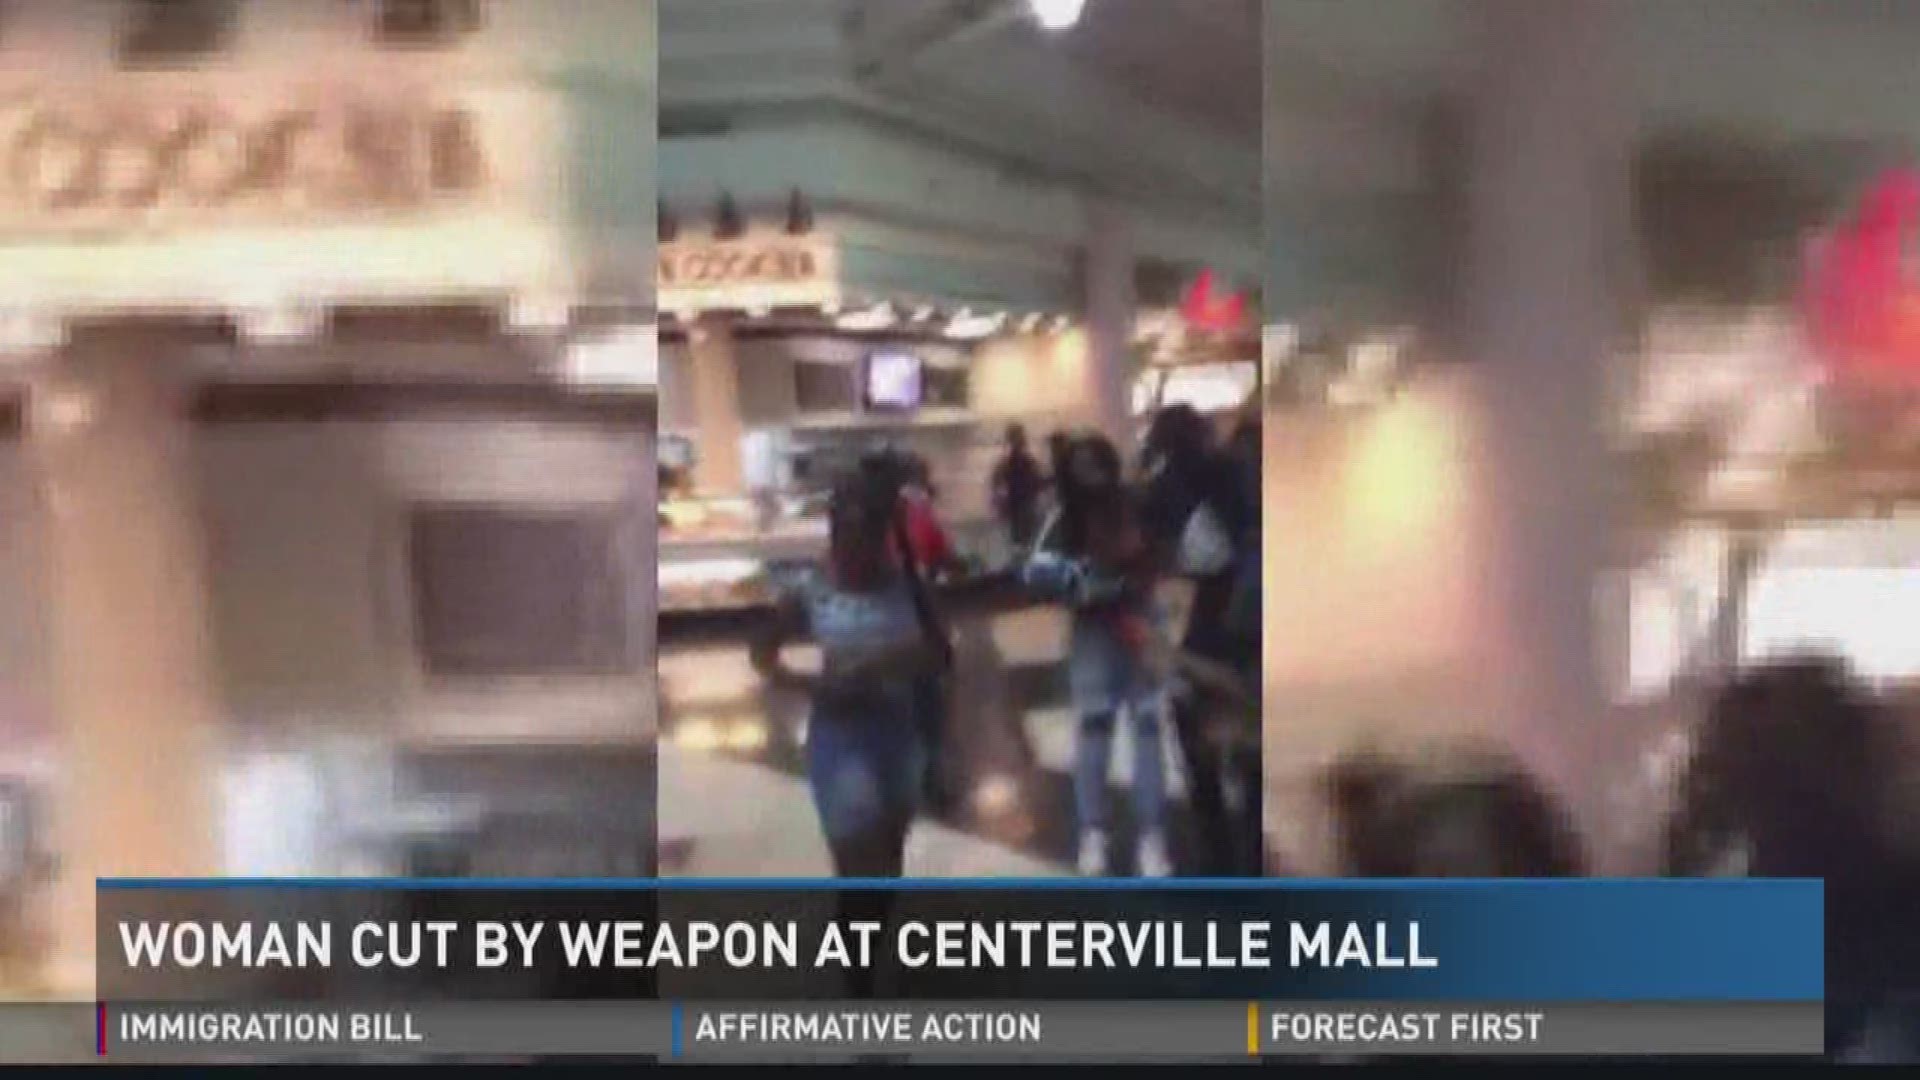 Woman cut by weapon at Centerville mall